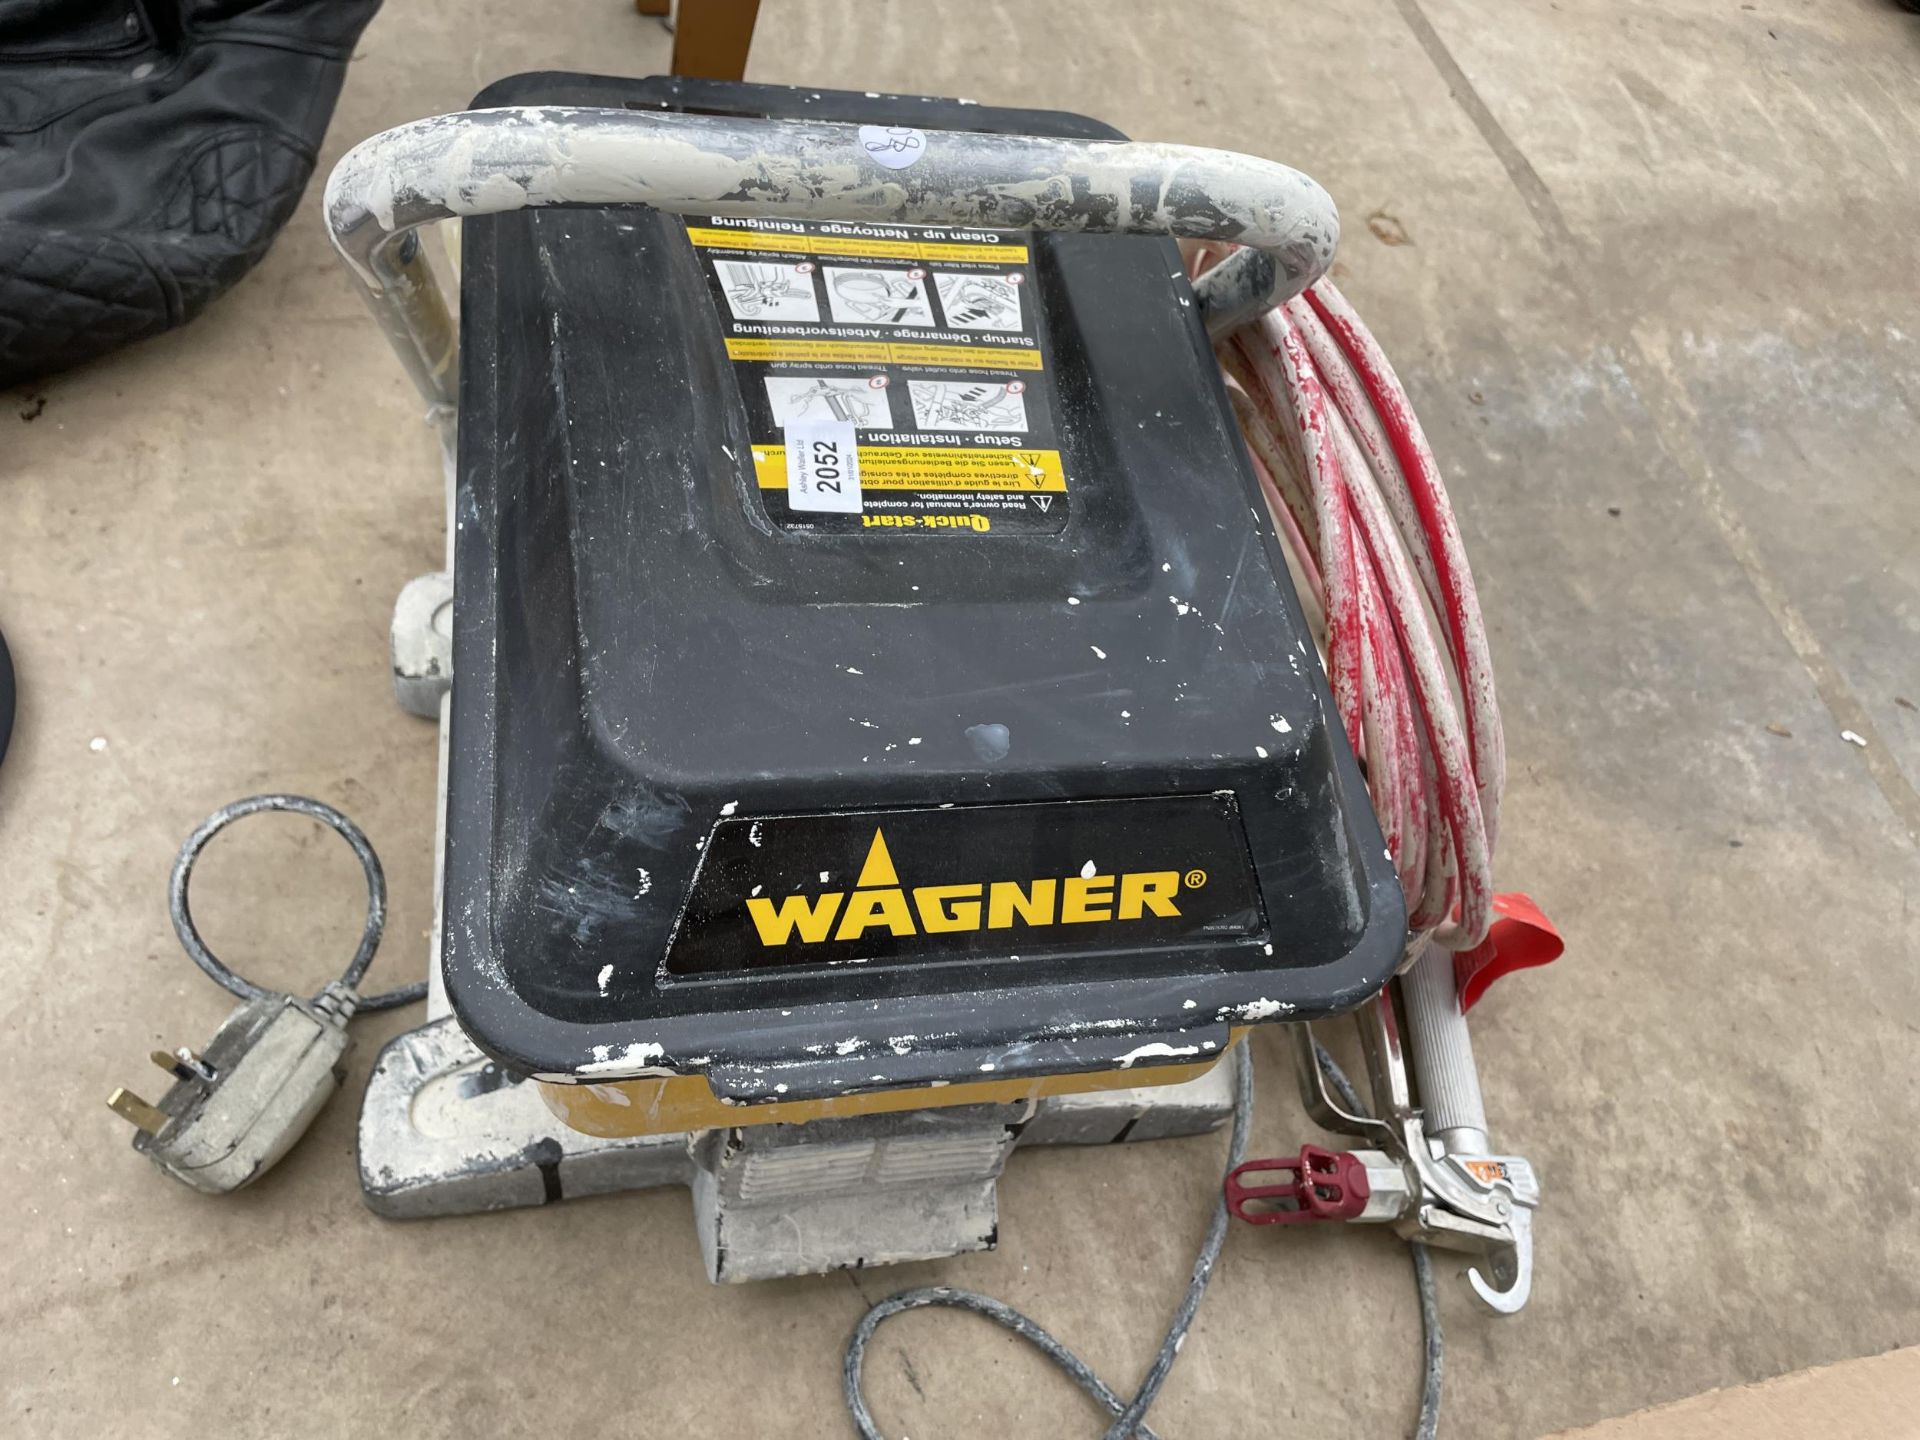 A WAGNER PAINT PRAYING MACHINE - Image 3 of 3